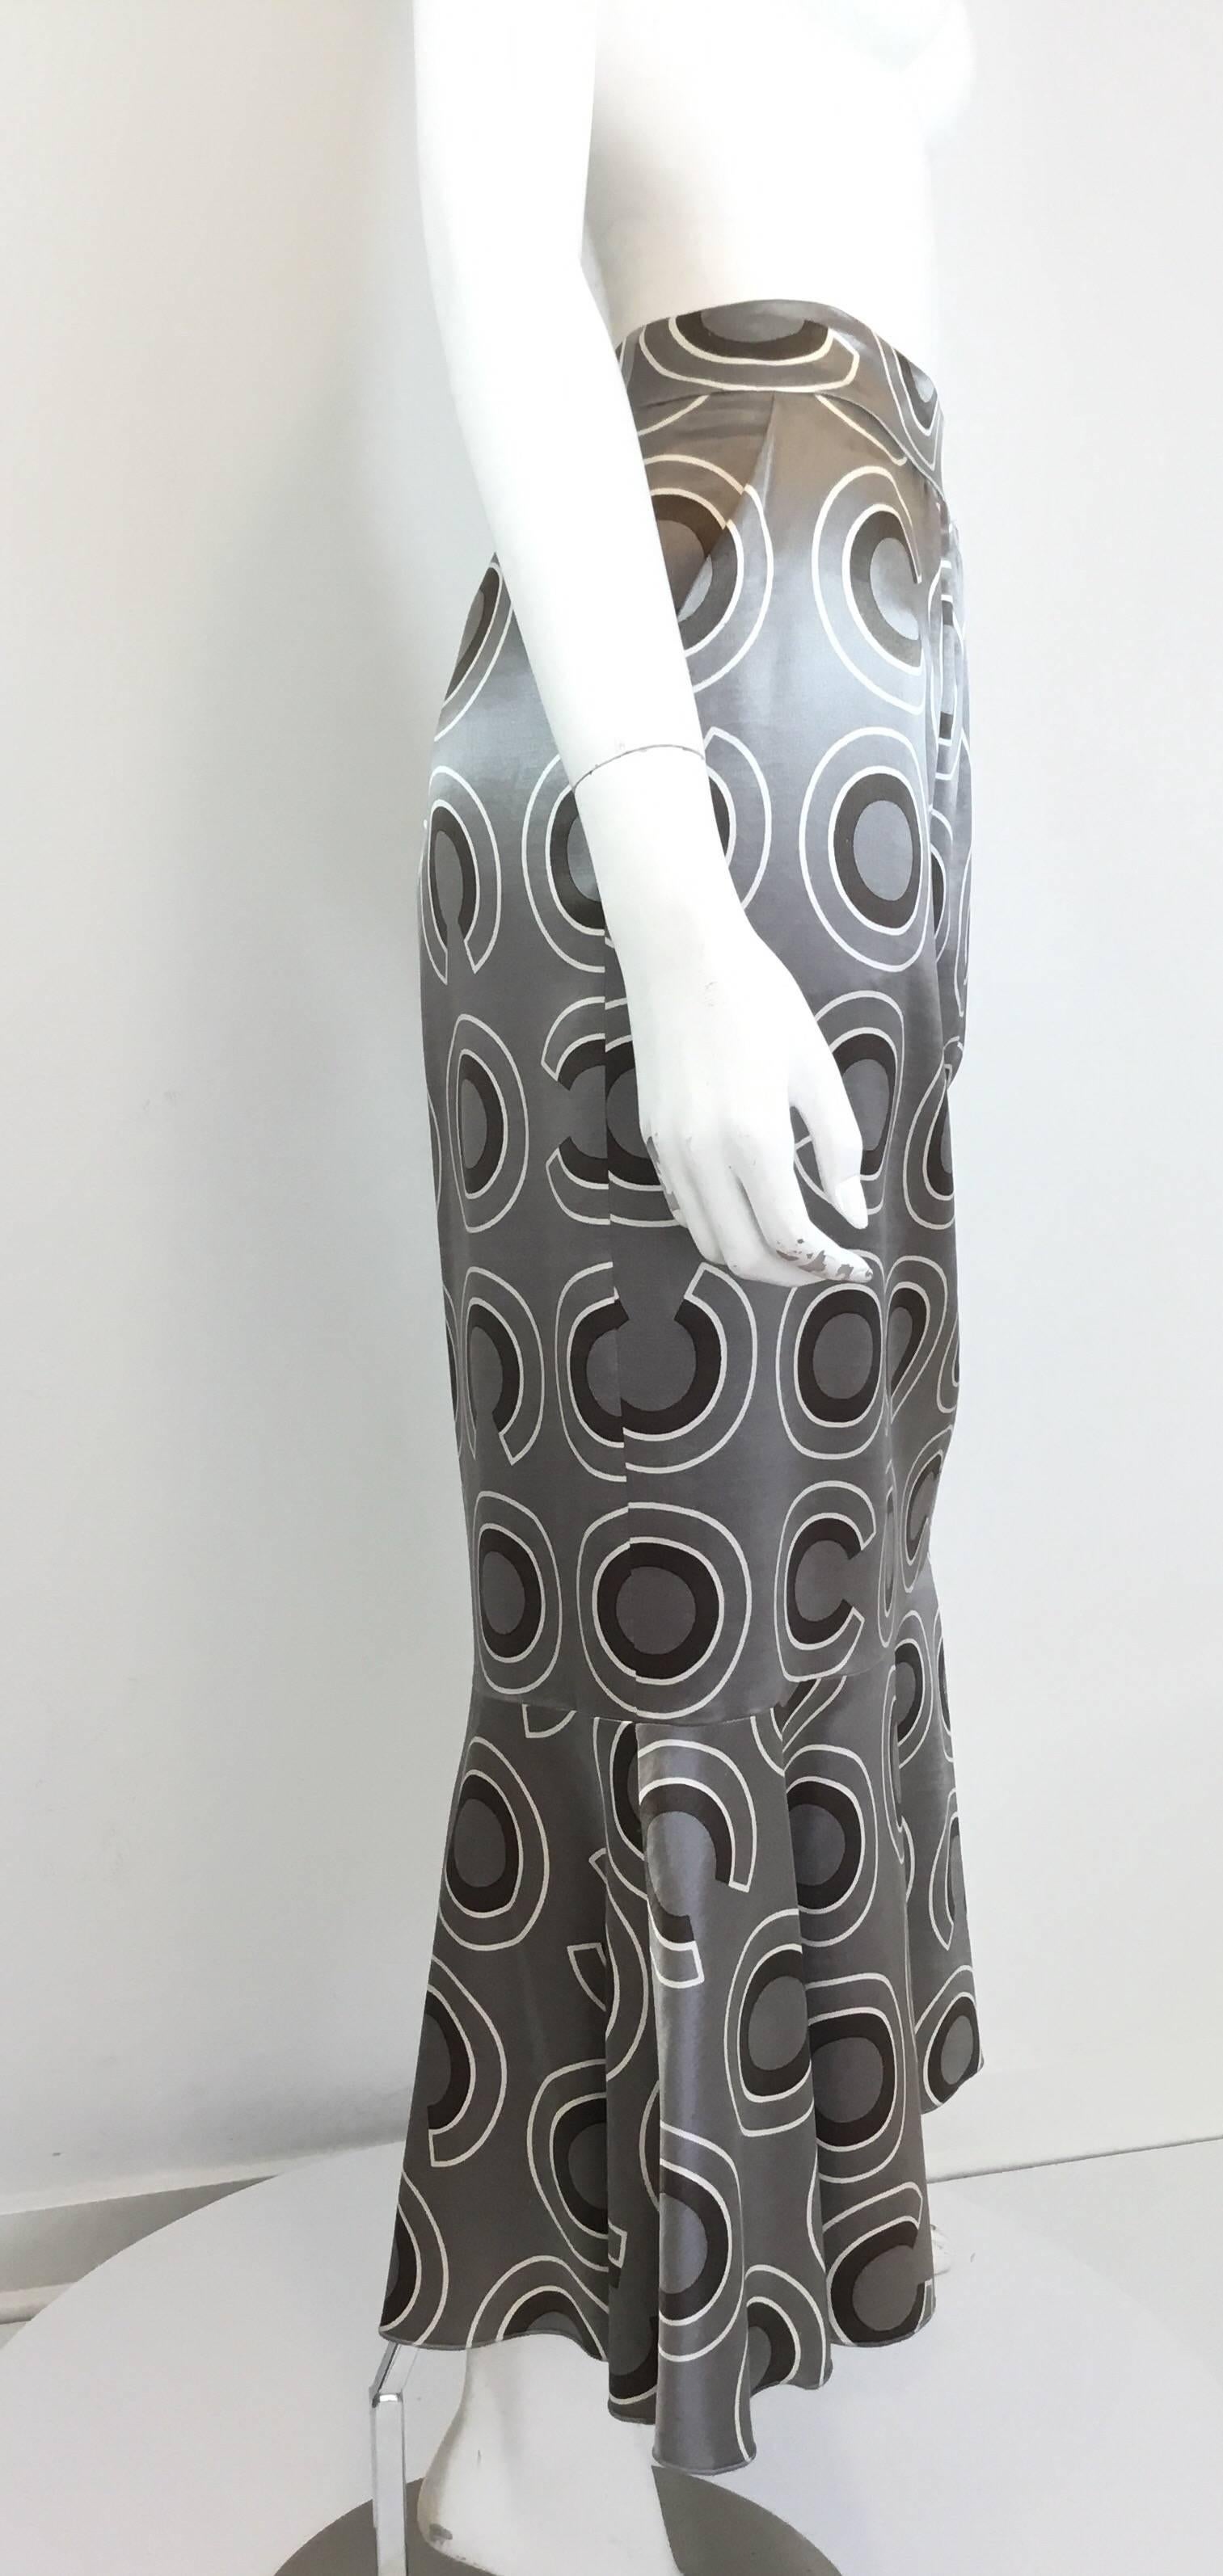 Grey Chanel skirt features a “Coco” Print throughout, pockets at the hip, fluted style with a back zipper fastening. Fully lined. Skirt is labeled Size 44, made in France, Wool/Silk Blend. 

Waist 32”, hips 42”, length 36”